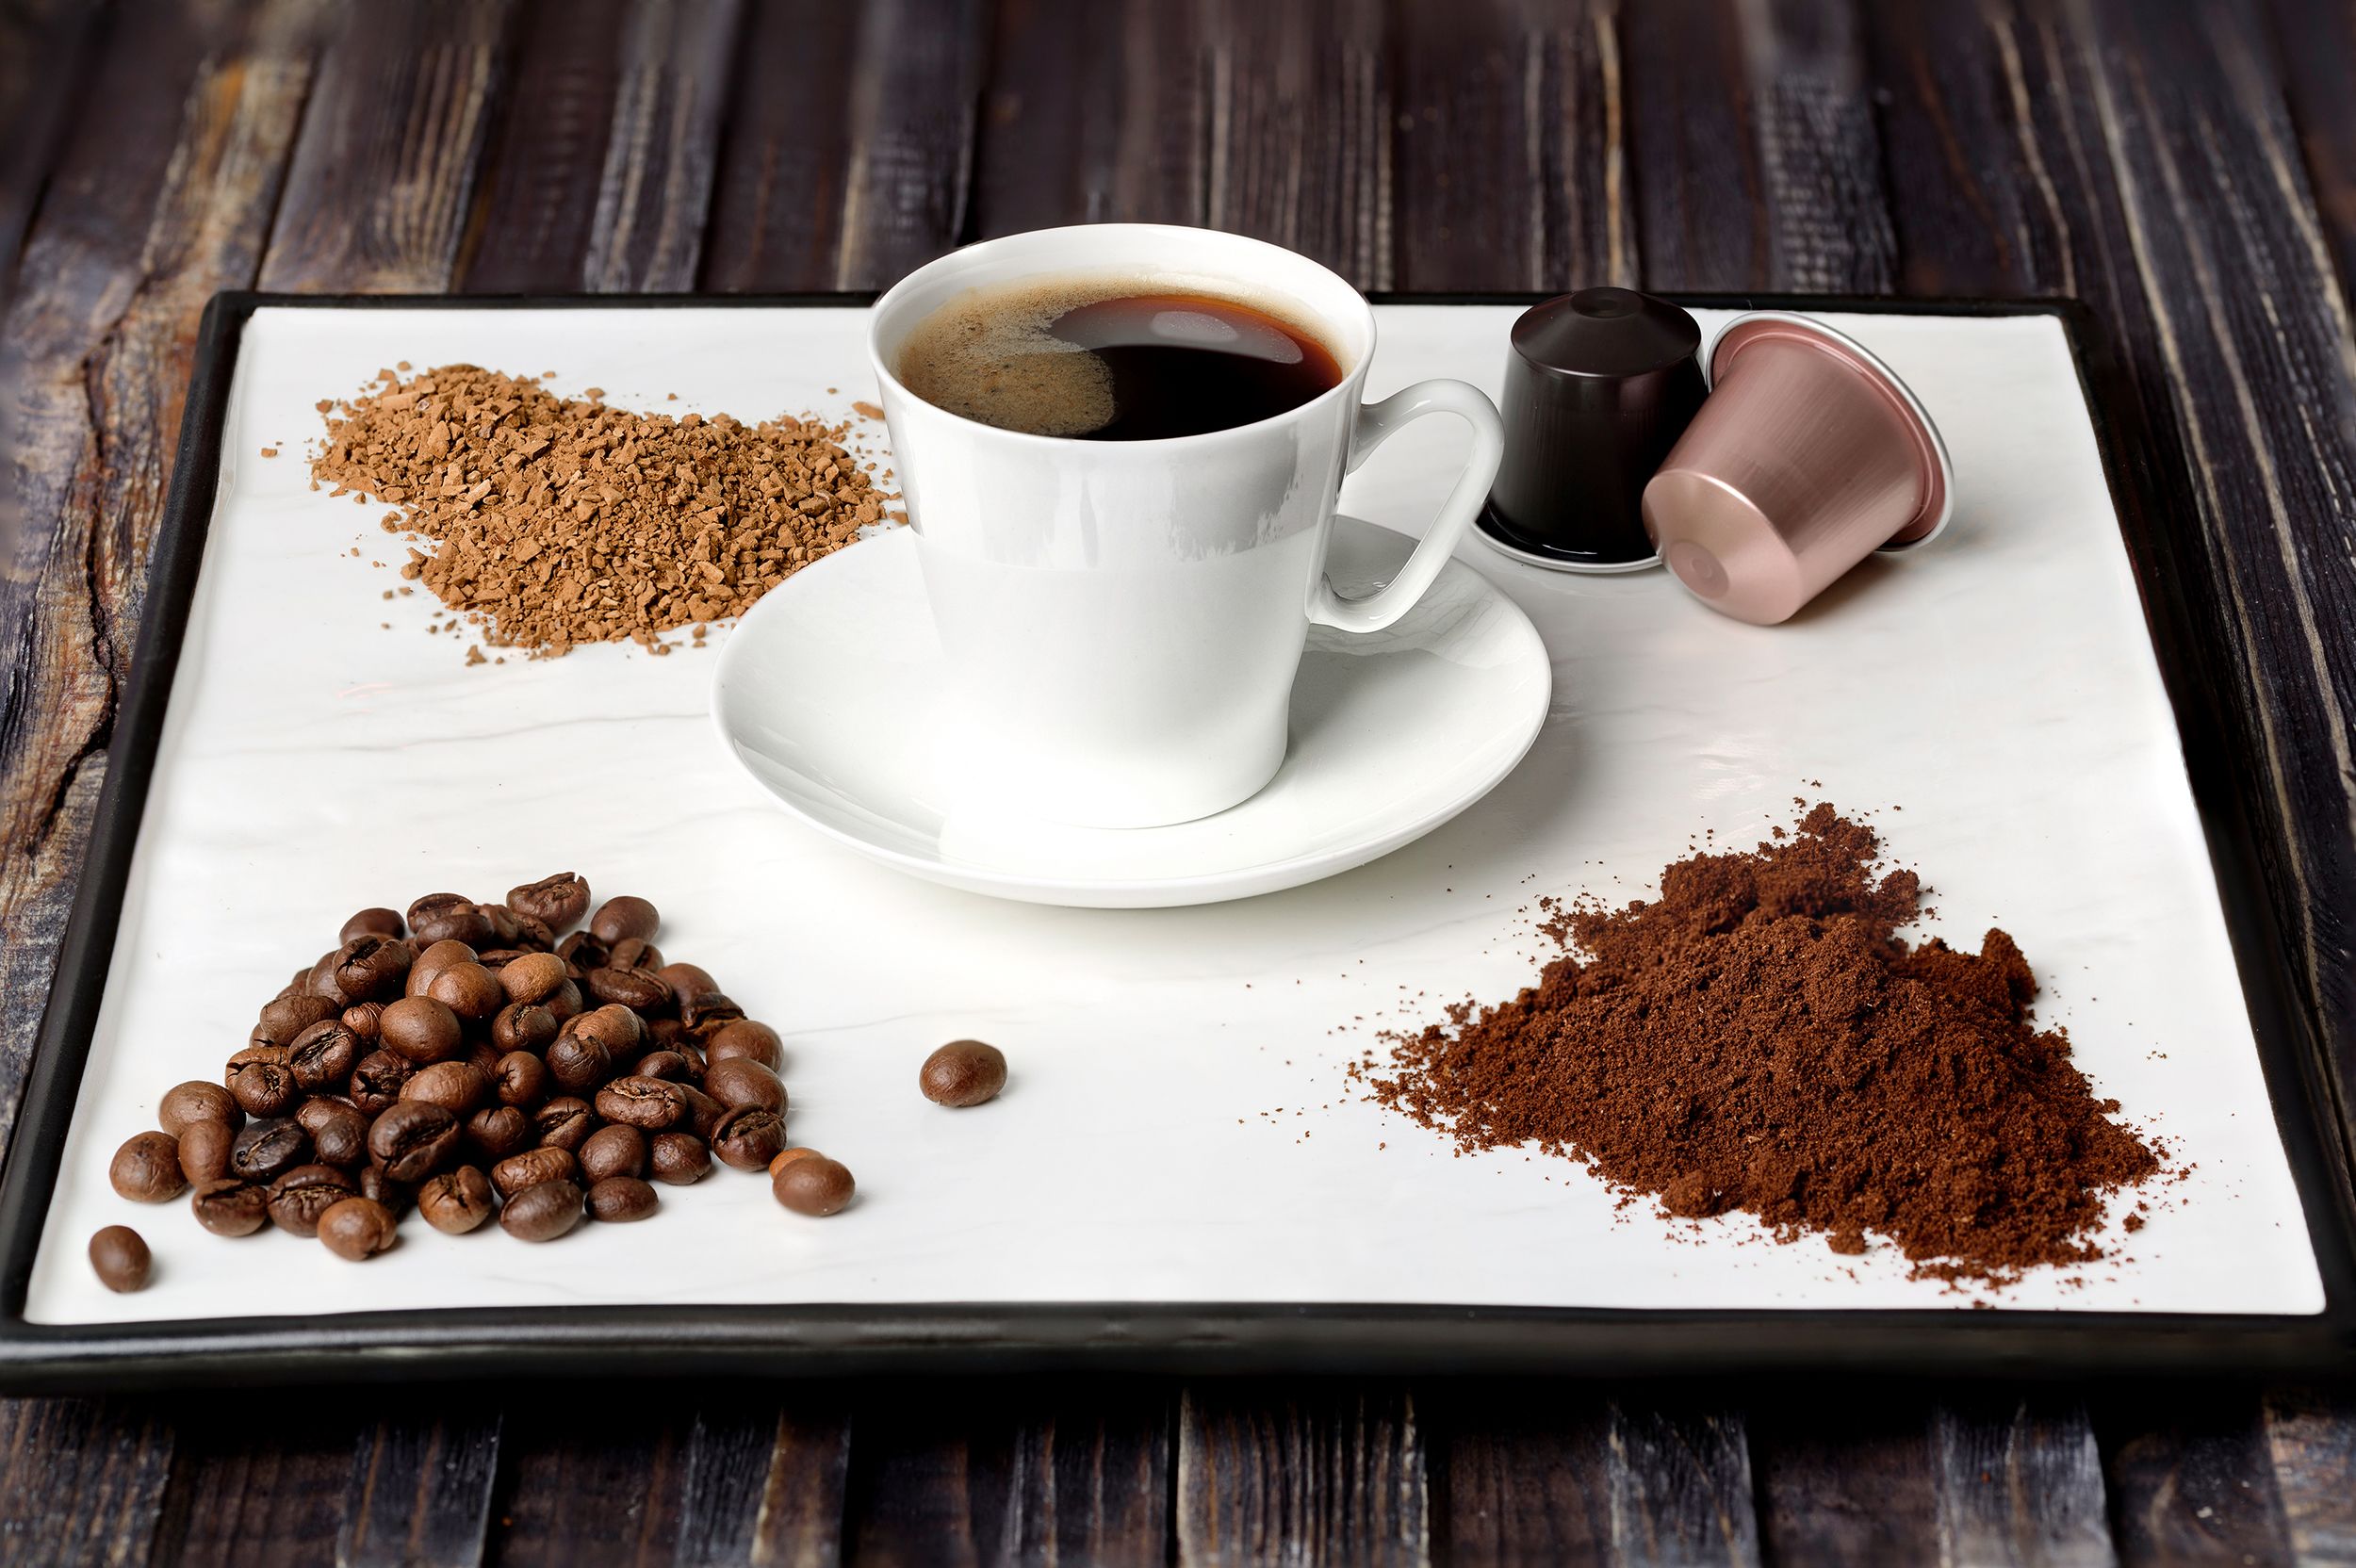 Do Men's Health Benefits from Coffee Use Exist